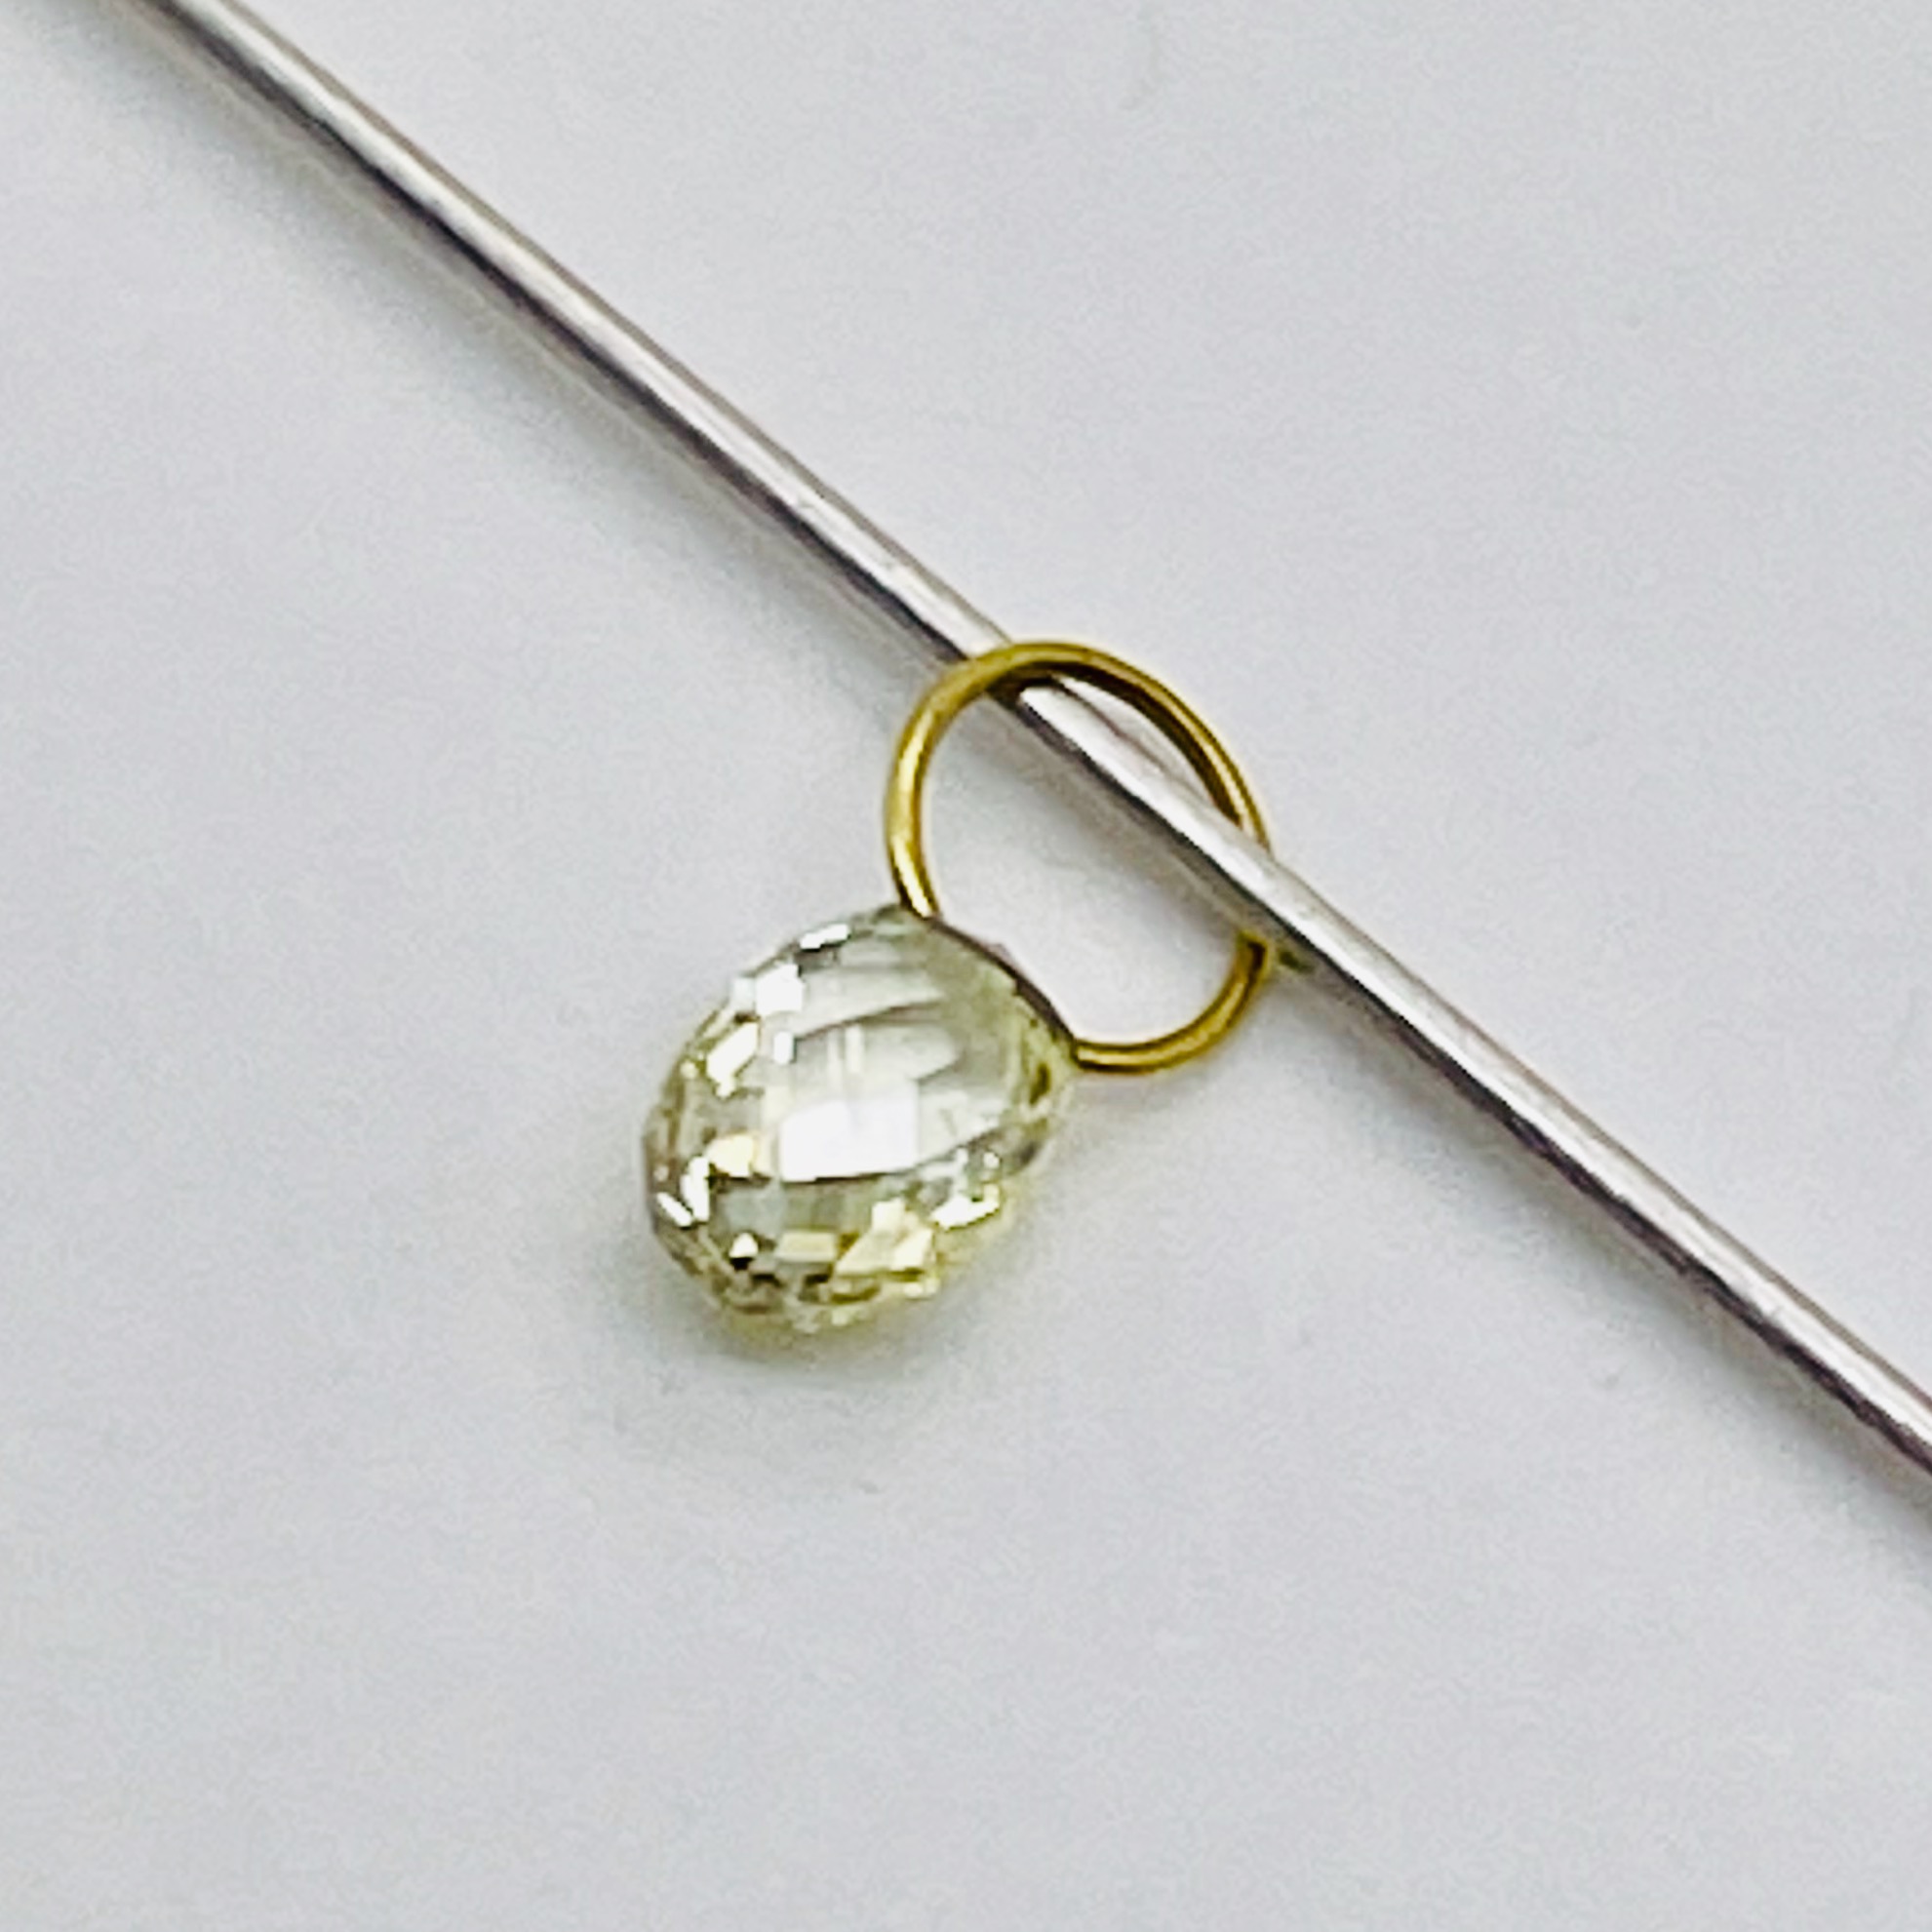 0.26cts Natural Canary Diamond & 18K Gold Pendant | 3.5x2.5x2mm | 1 Bead | - image 4 of 12